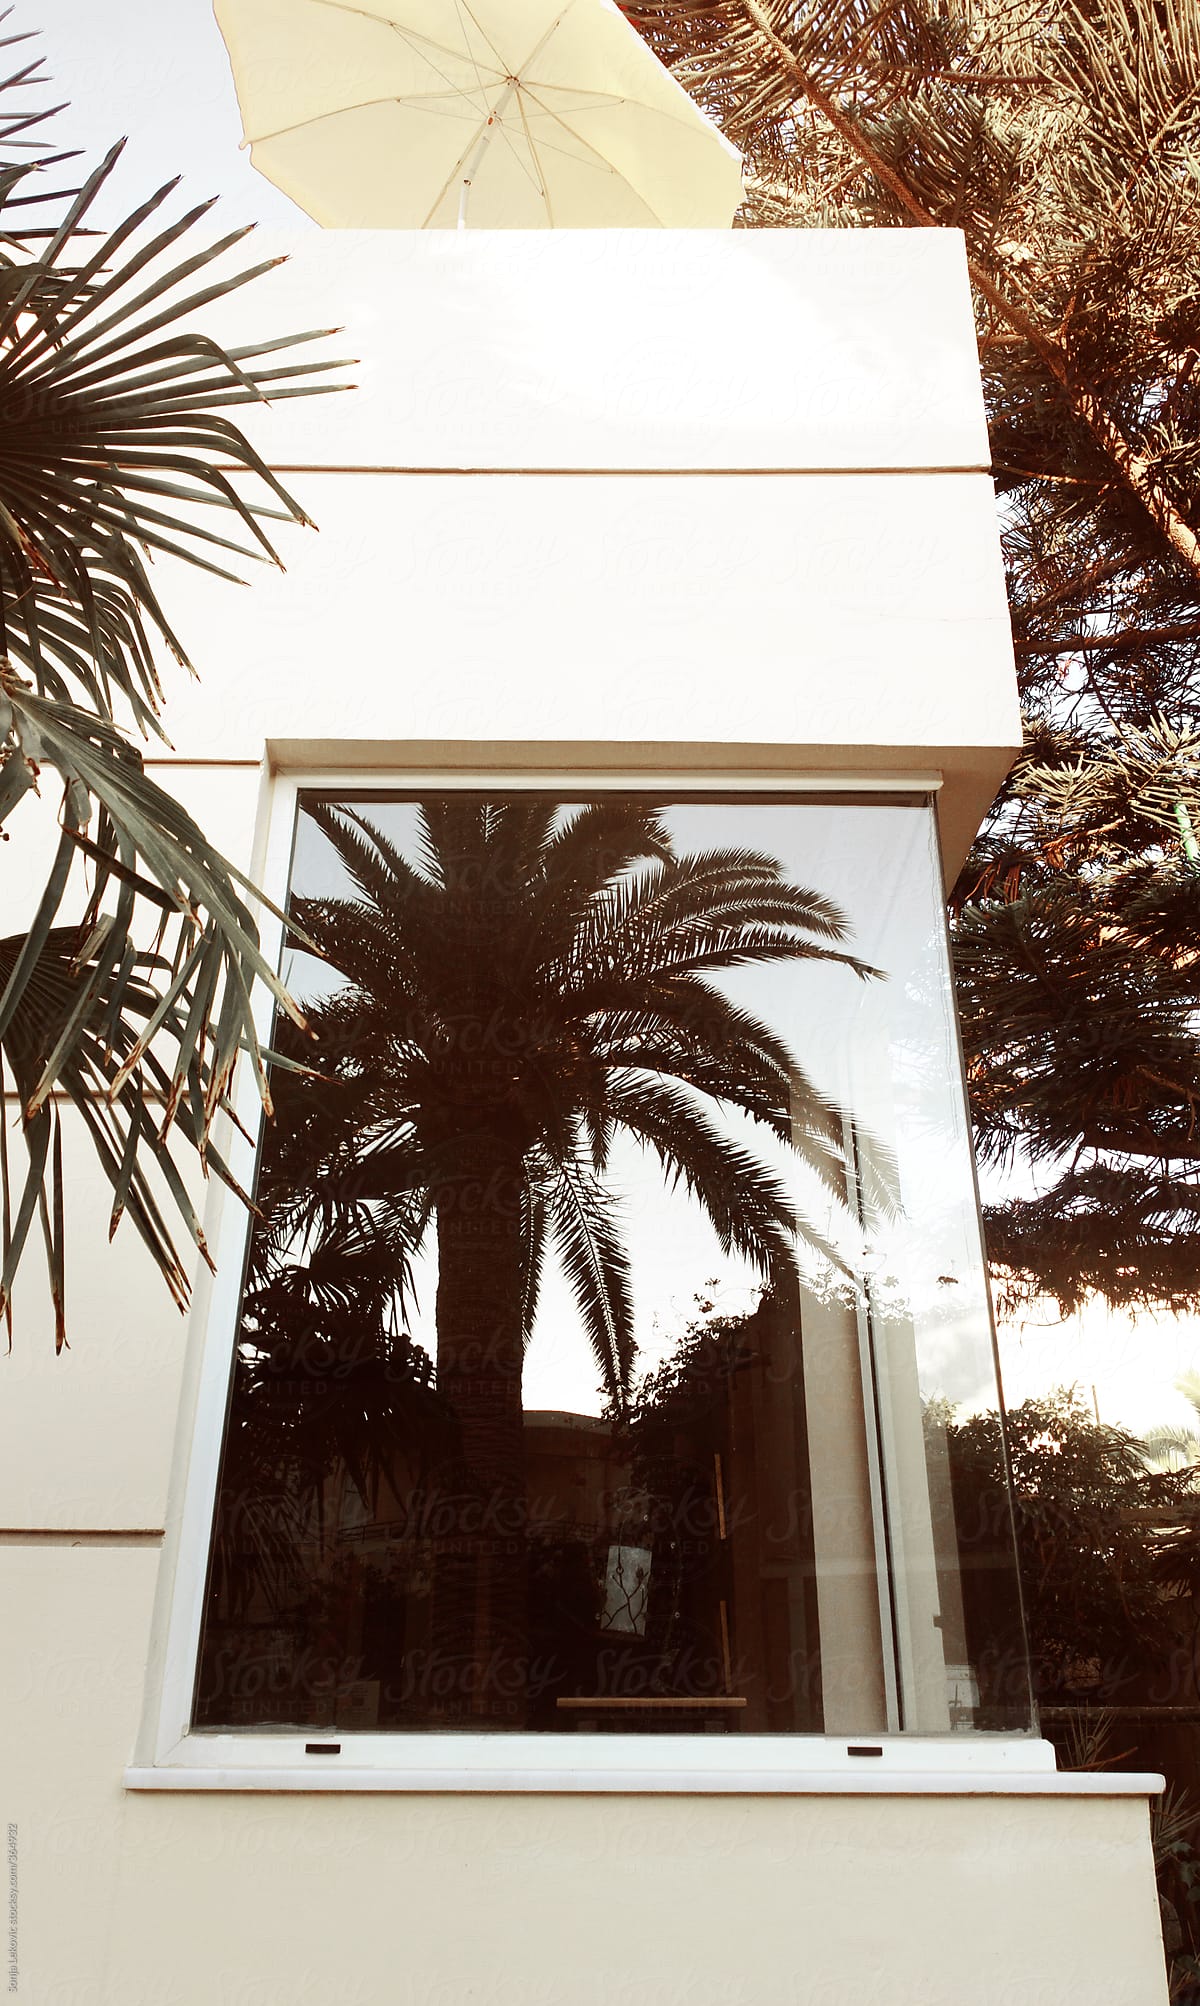 reflection of a palm tree in the window